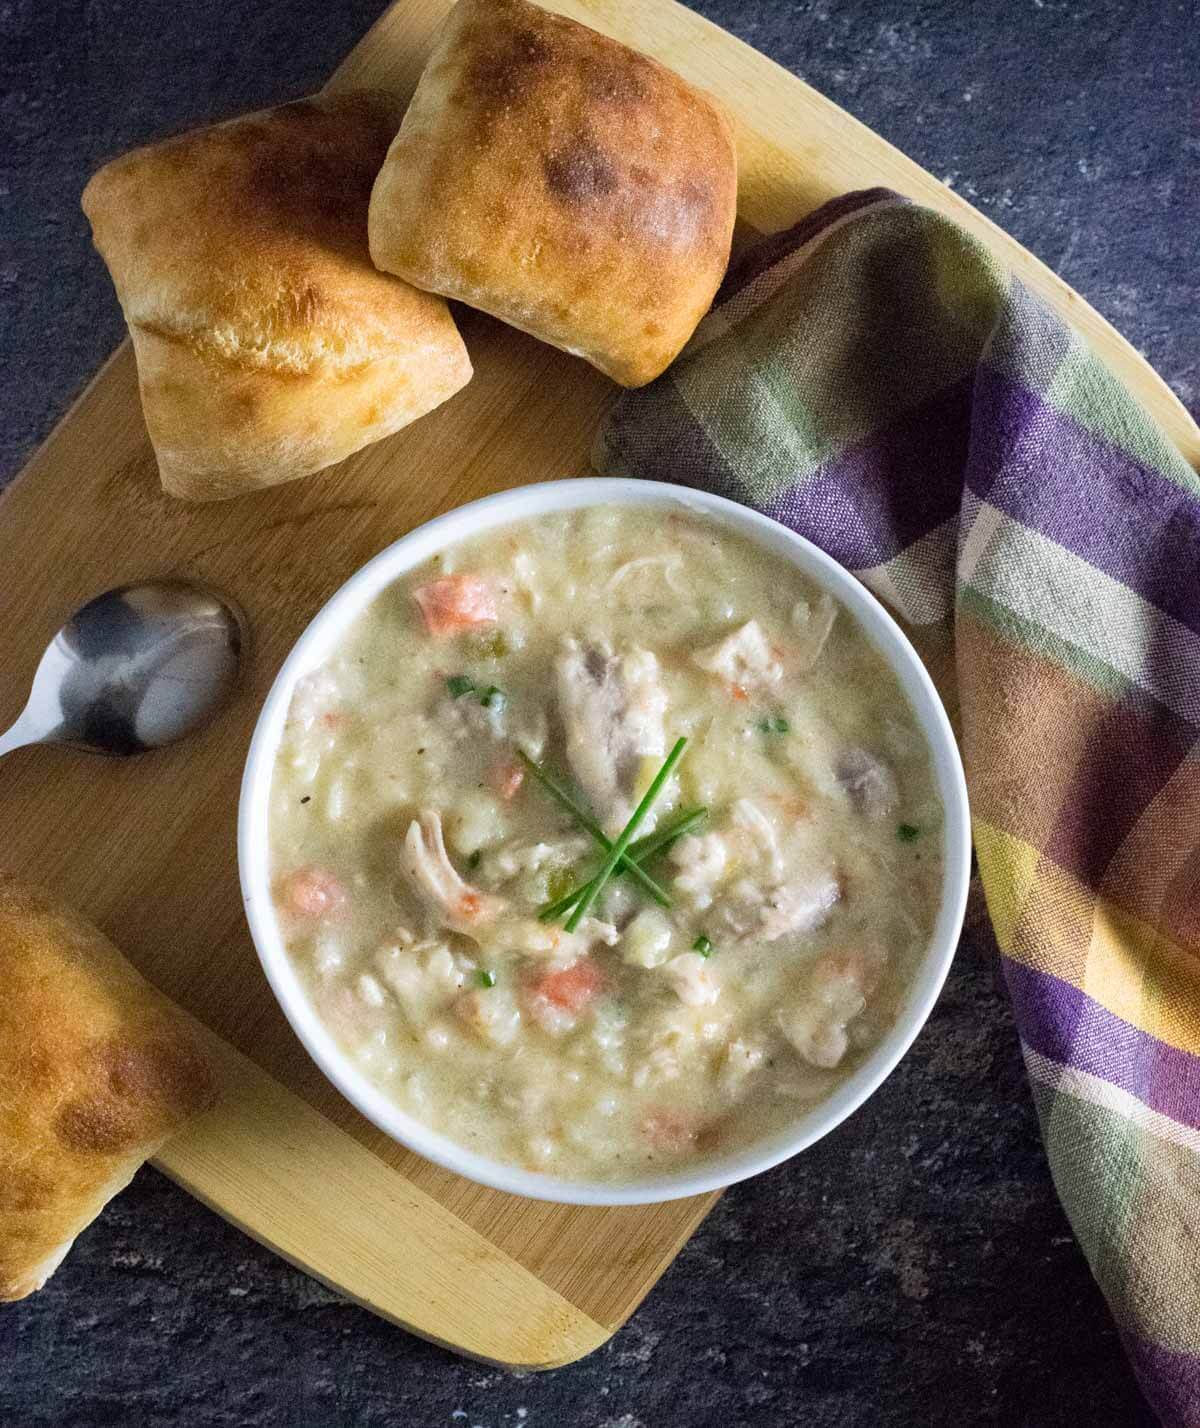 Chicken and potato soup served with fresh bread.